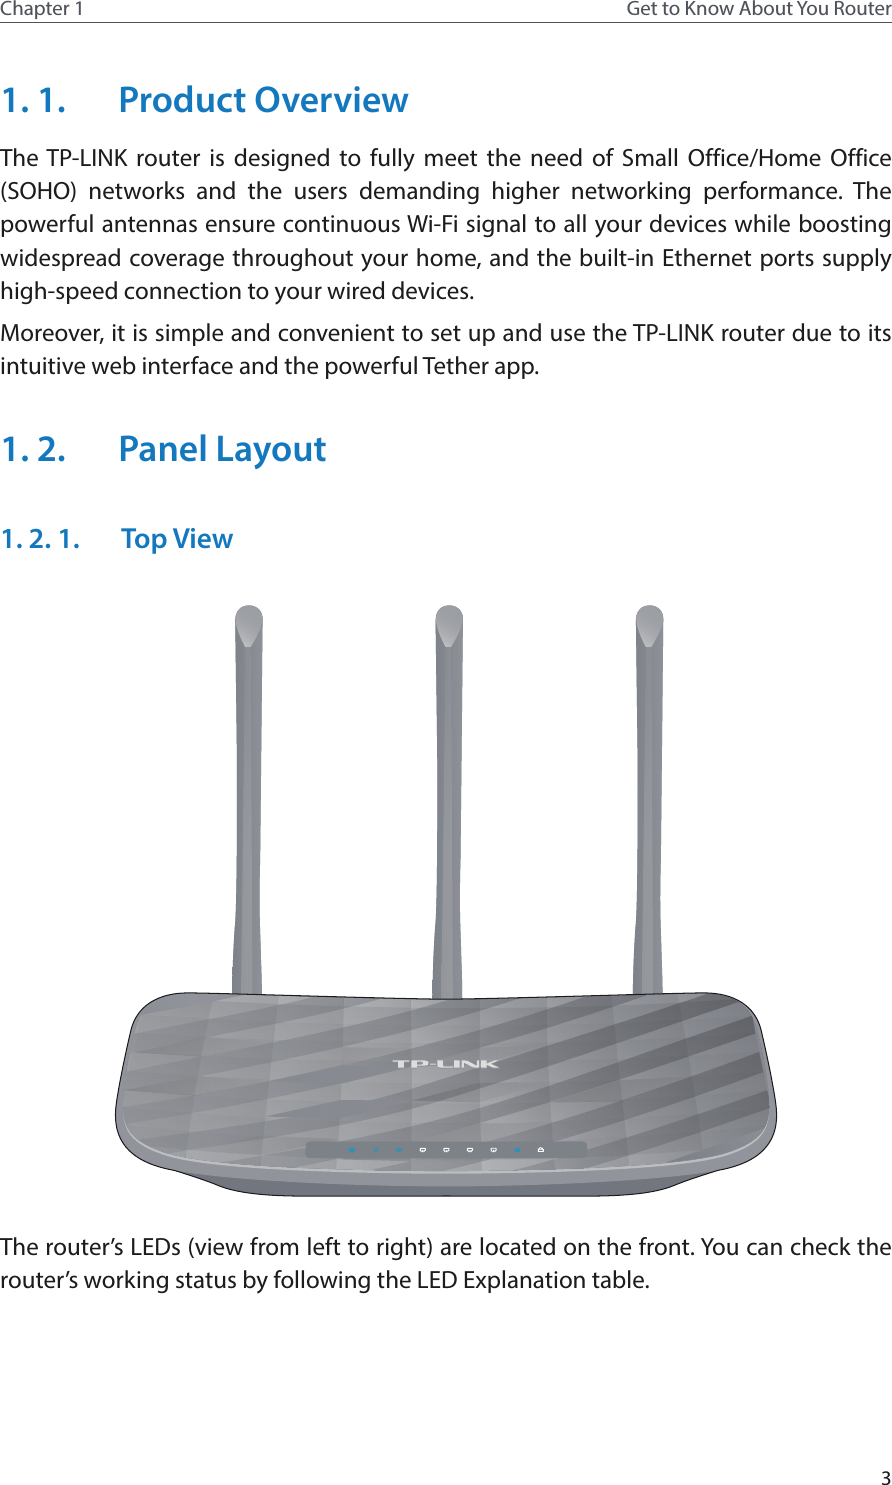 3Chapter 1 Get to Know About You Router1. 1.  Product OverviewThe TP-LINK router is designed to fully meet the need of Small Office/Home Office (SOHO) networks and the users demanding higher networking performance. The powerful antennas ensure continuous Wi-Fi signal to all your devices while boosting widespread coverage throughout your home, and the built-in Ethernet ports supply high-speed connection to your wired devices.Moreover, it is simple and convenient to set up and use the TP-LINK router due to its intuitive web interface and the powerful Tether app.1. 2.  Panel Layout1. 2. 1.  Top ViewThe router’s LEDs (view from left to right) are located on the front. You can check the router’s working status by following the LED Explanation table.